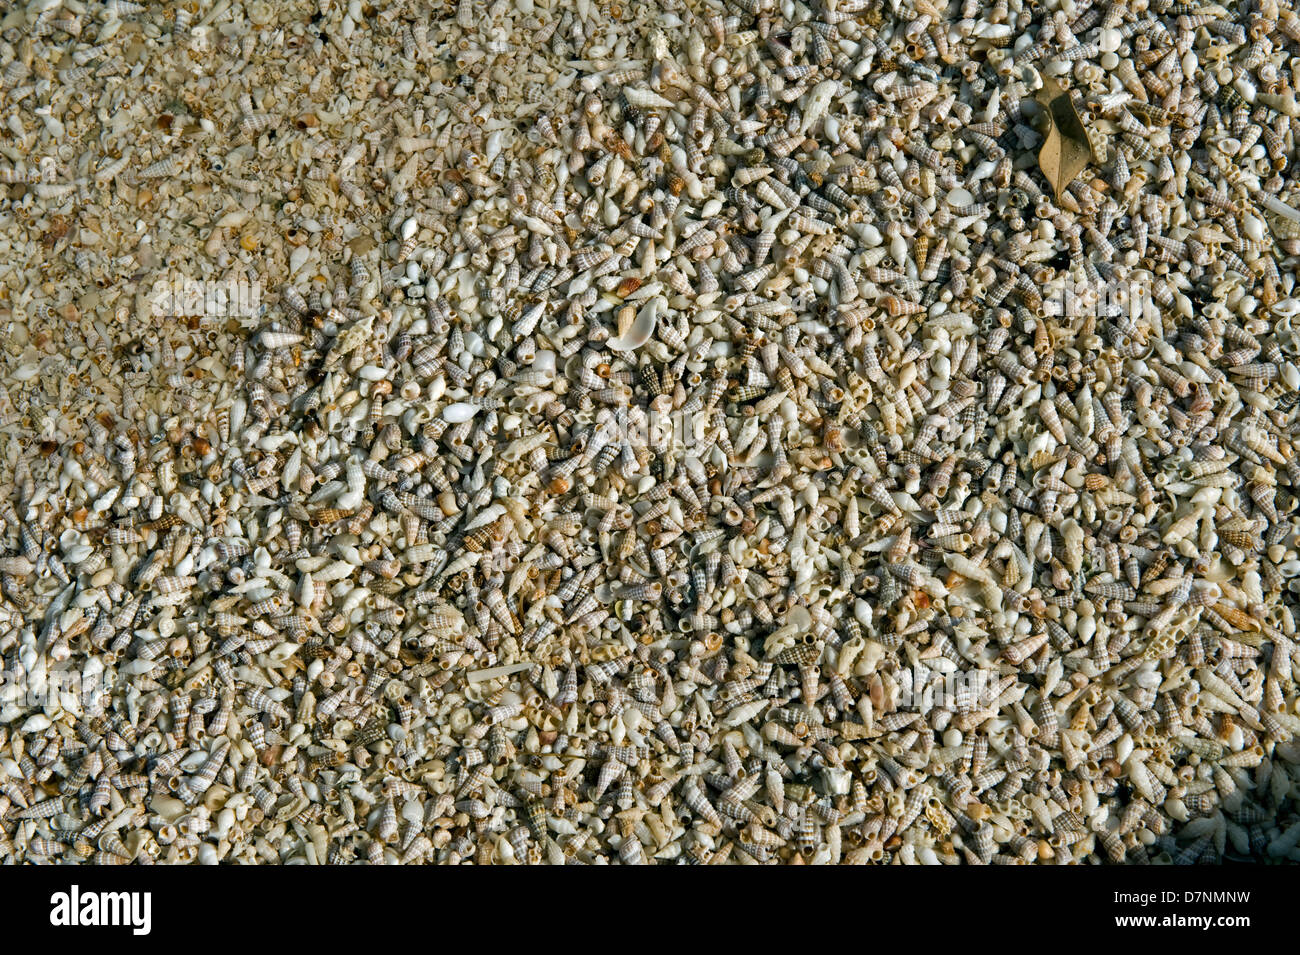 Beach with larger numbers of small sea shells, Abu Dhabi, United Arab Emirates Stock Photo